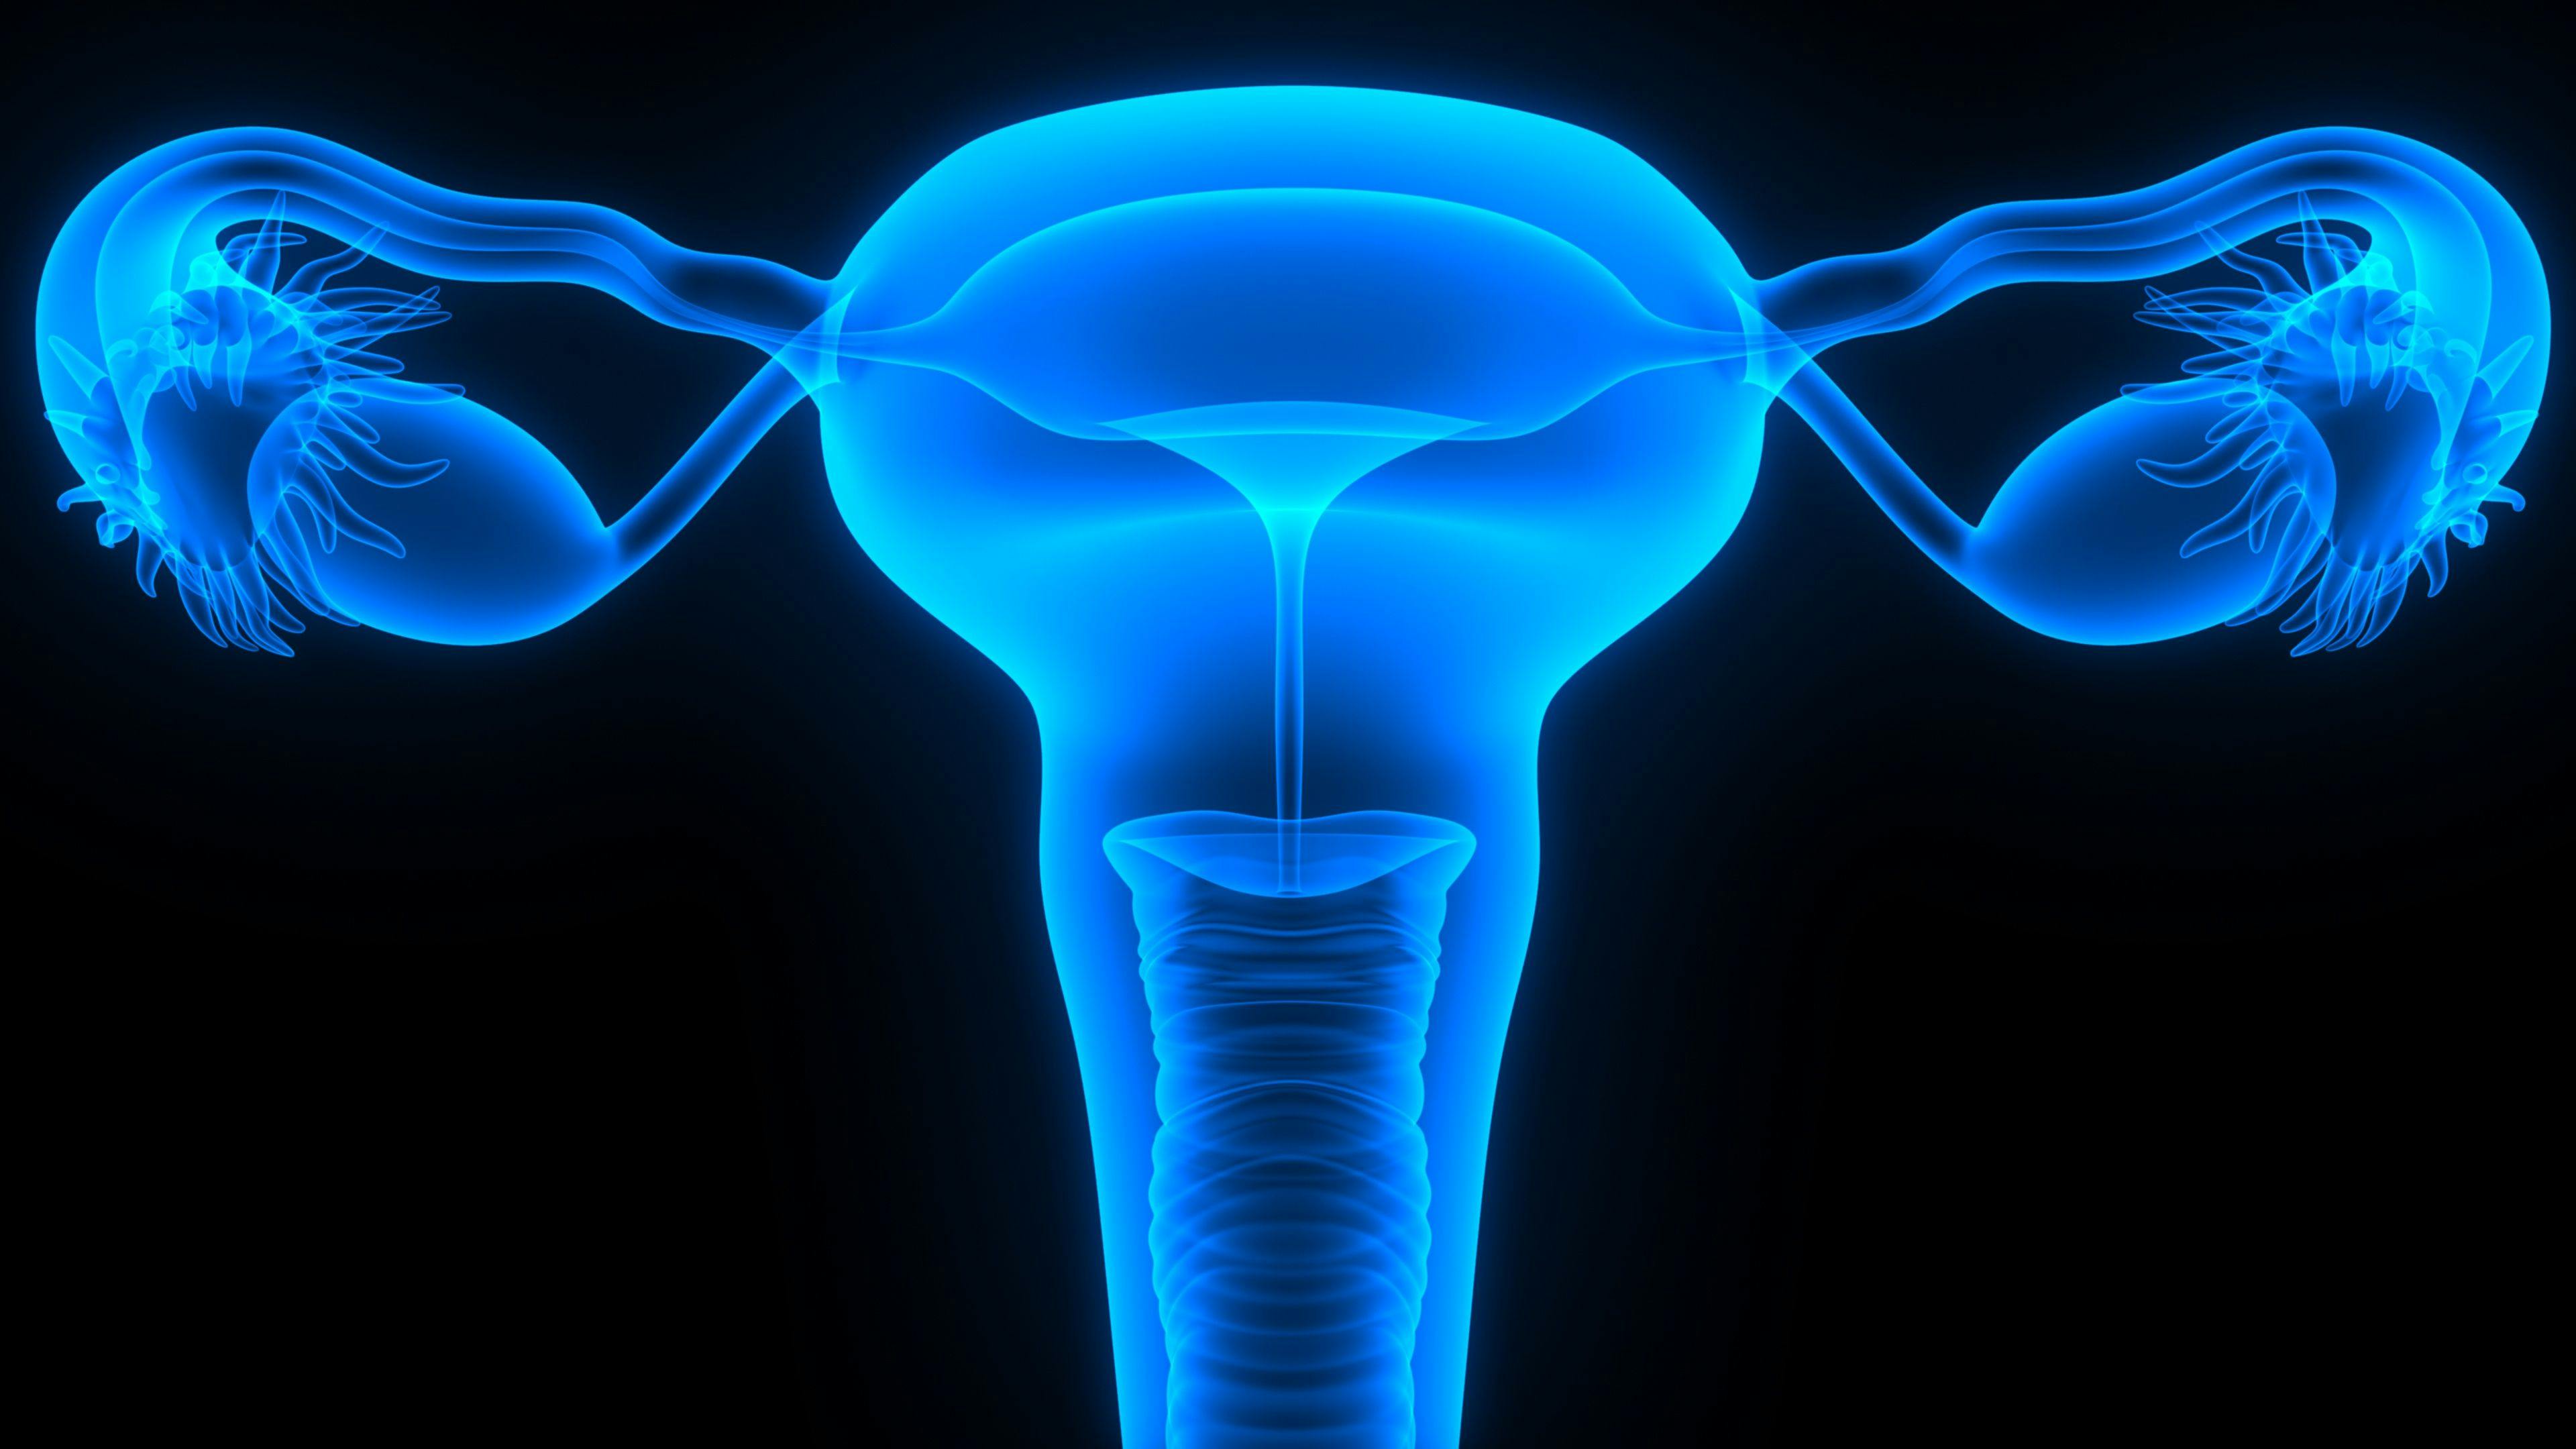 Cemiplimab Impresses in a Phase 3 Trial of Cervical Cancer, Regulatory Submission Expected